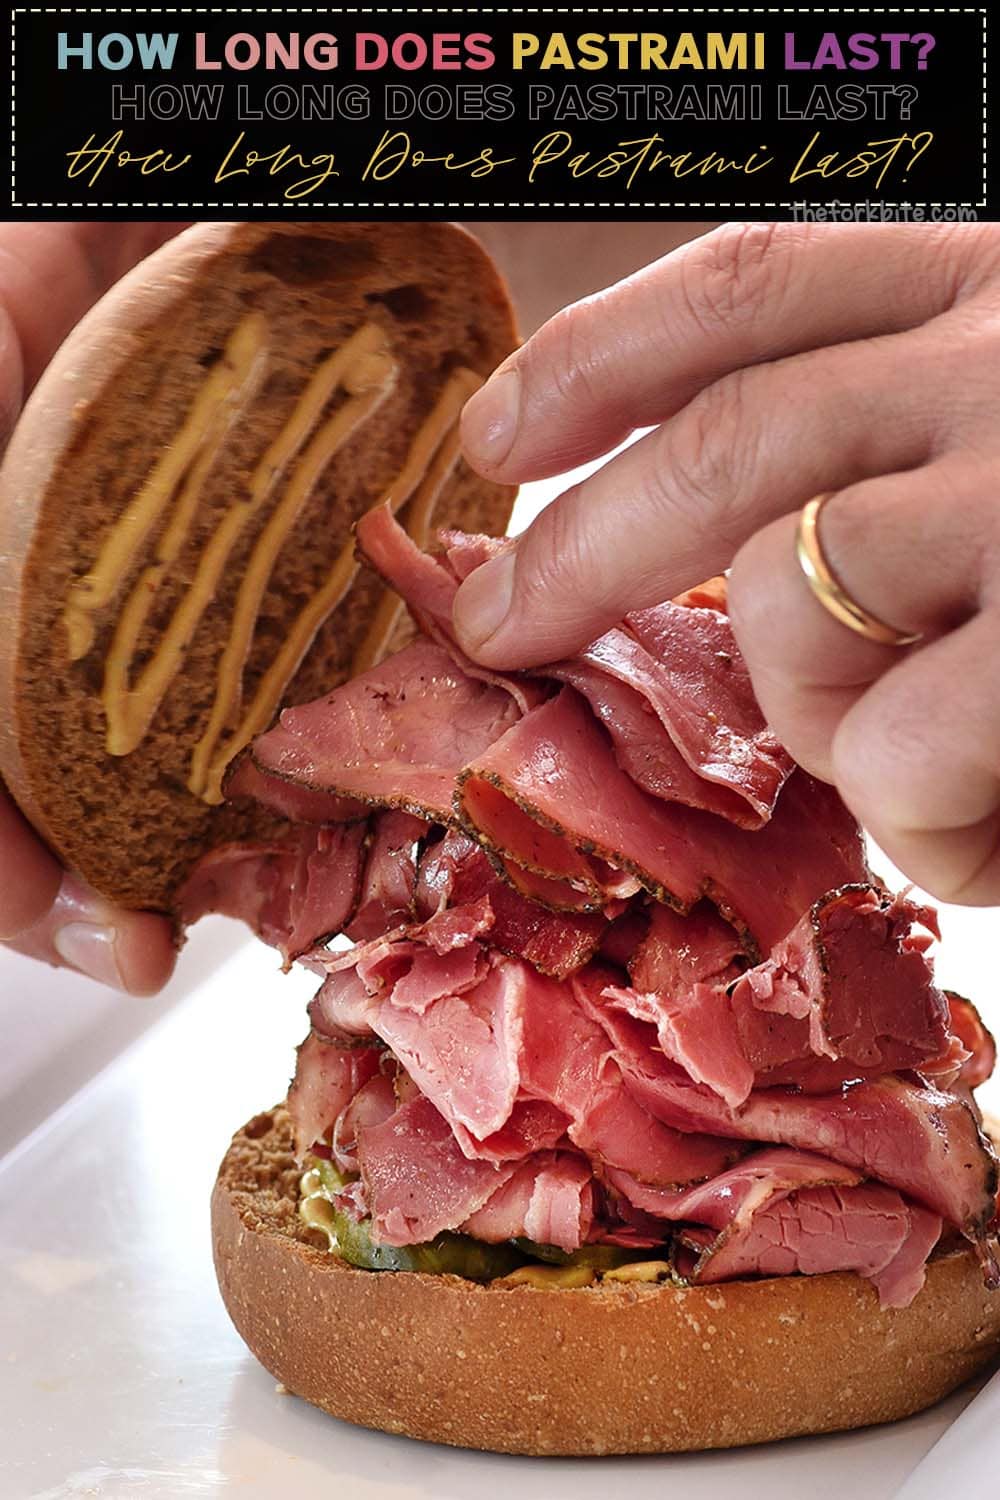 In this guide, you will learn about many factors that directly impact the proper storage of Pastrami. This is especially true if you are planning on storing the carefully prepared meat on a long-term basis.